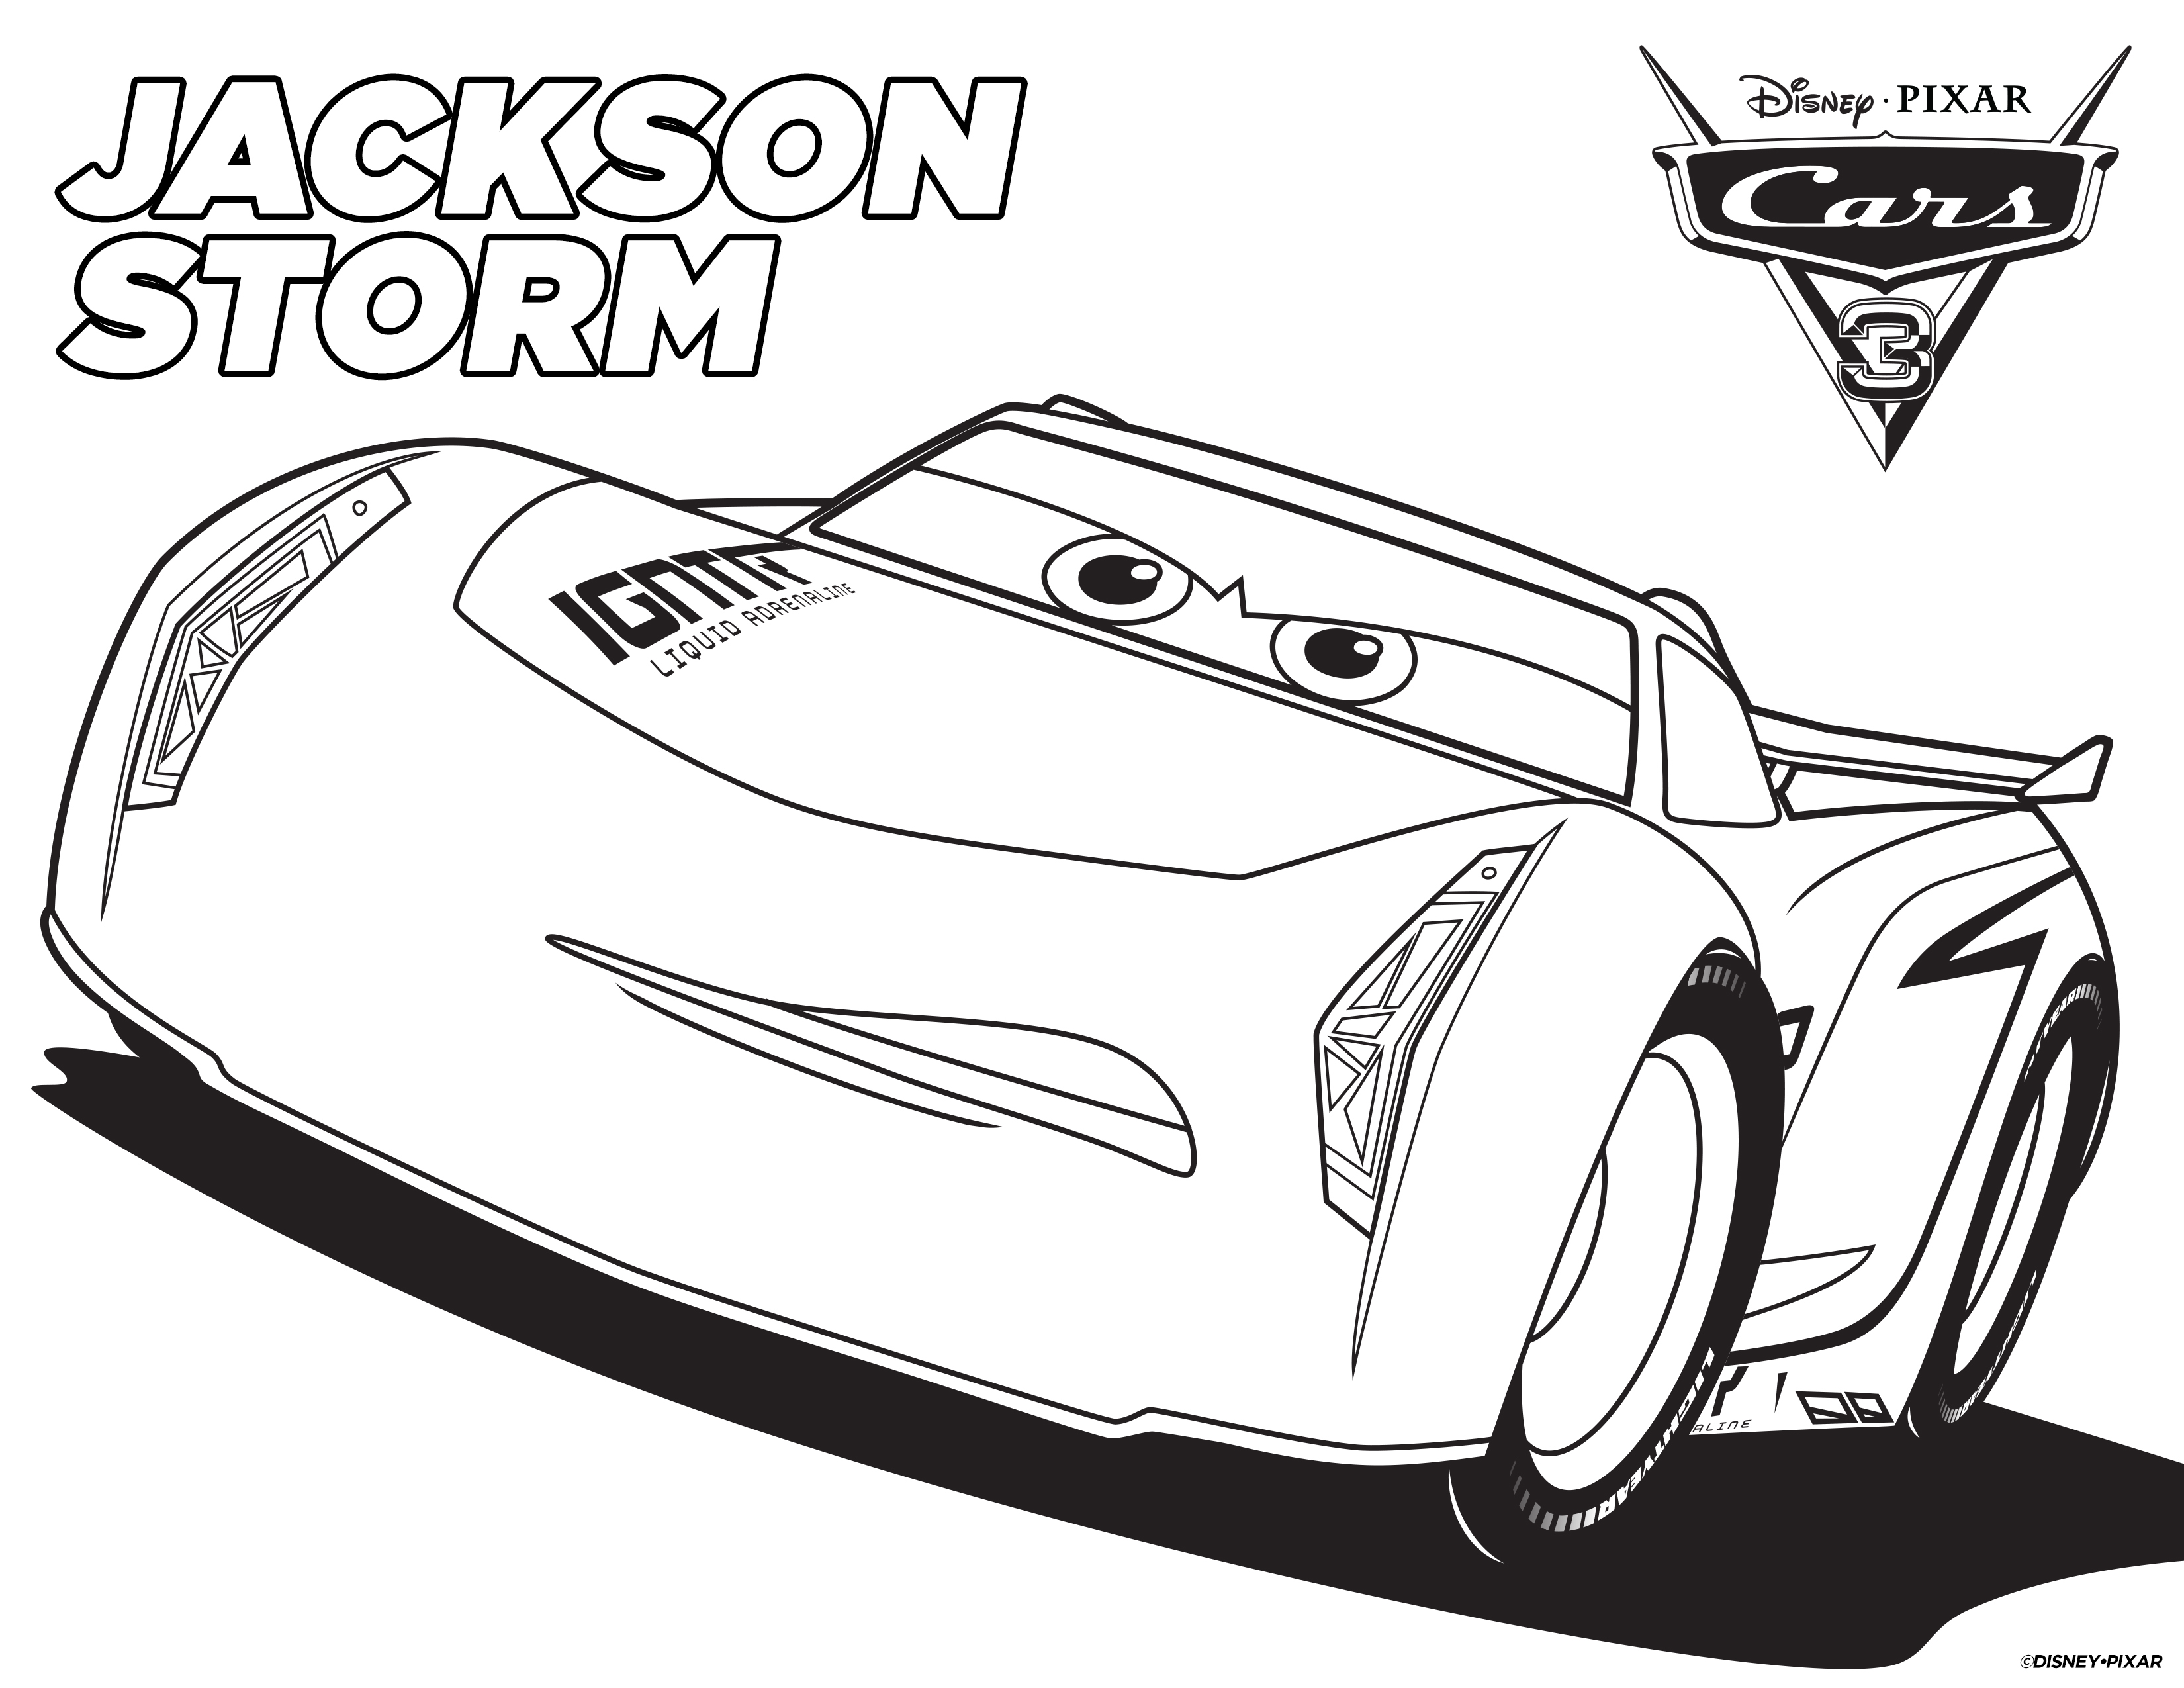 Cars Coloring Pages - Best Coloring Pages For Kids